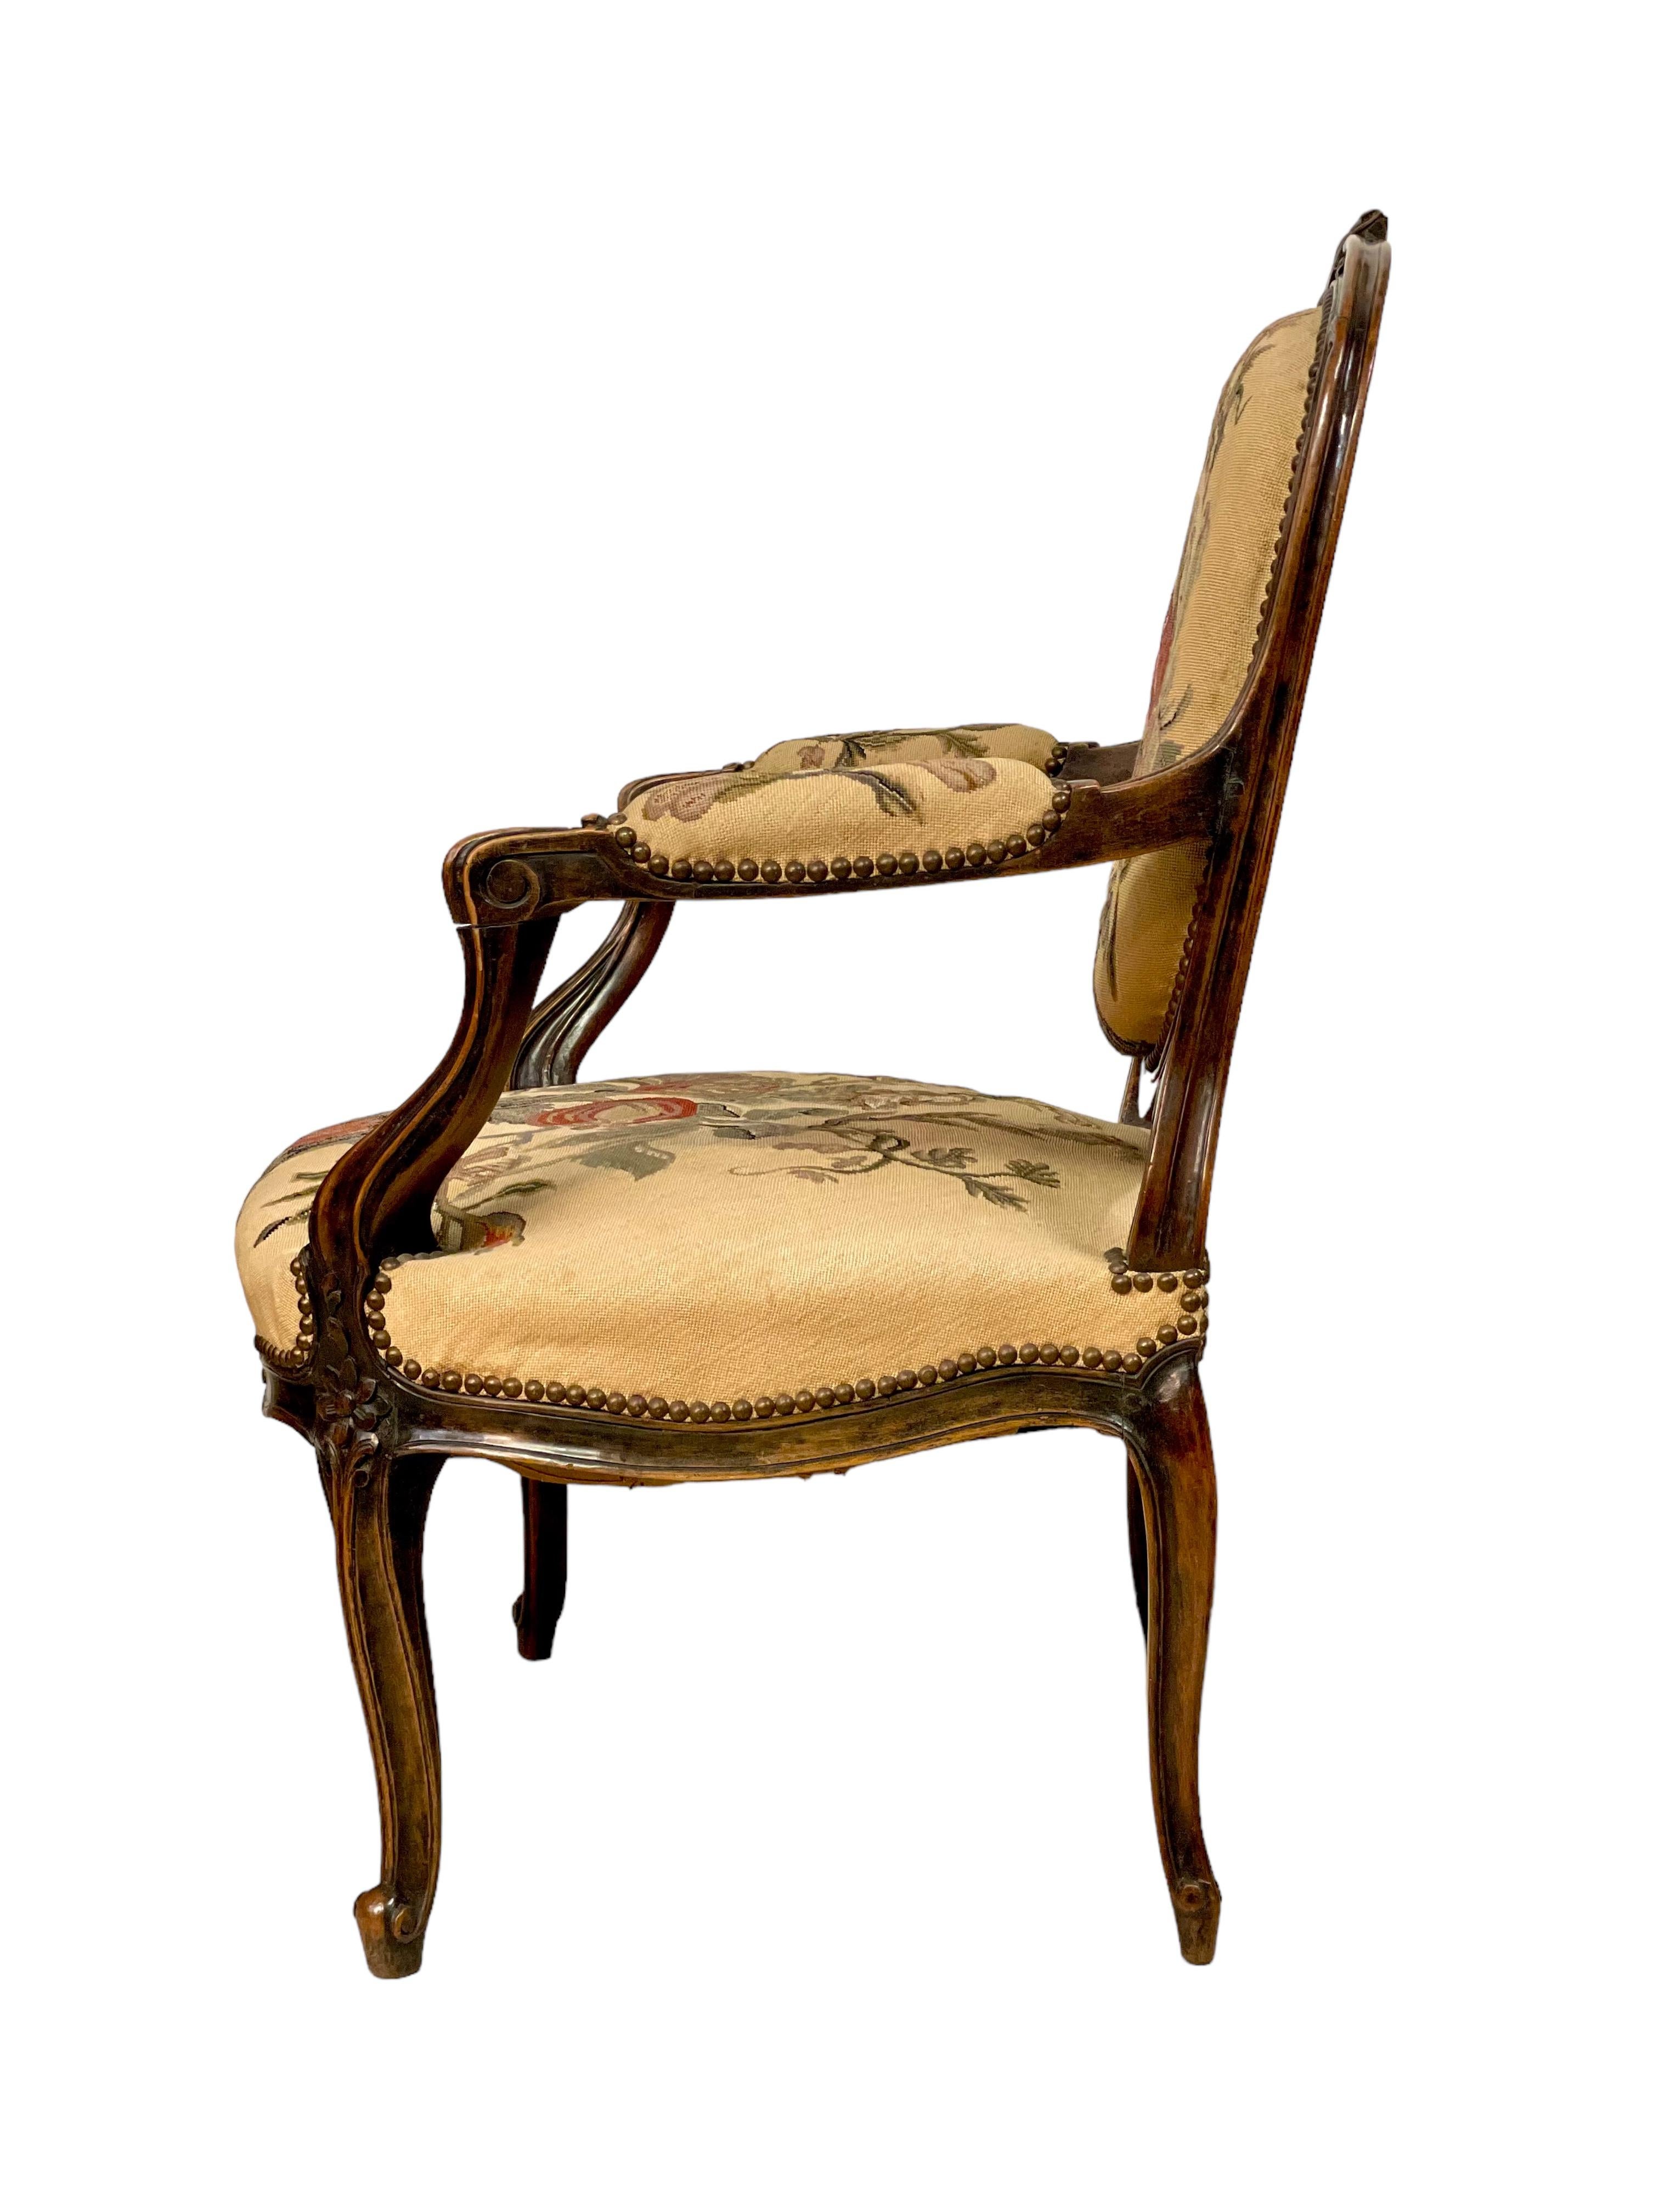 A sumptuous and beautifully upholstered 'Fauteuil à la Reine' armchair, in the Louis XV style and dating from the Napoleon III period. Crafted from moulded, and formerly blackened, walnut, this wonderful antique chair has a wide and comfortable seat